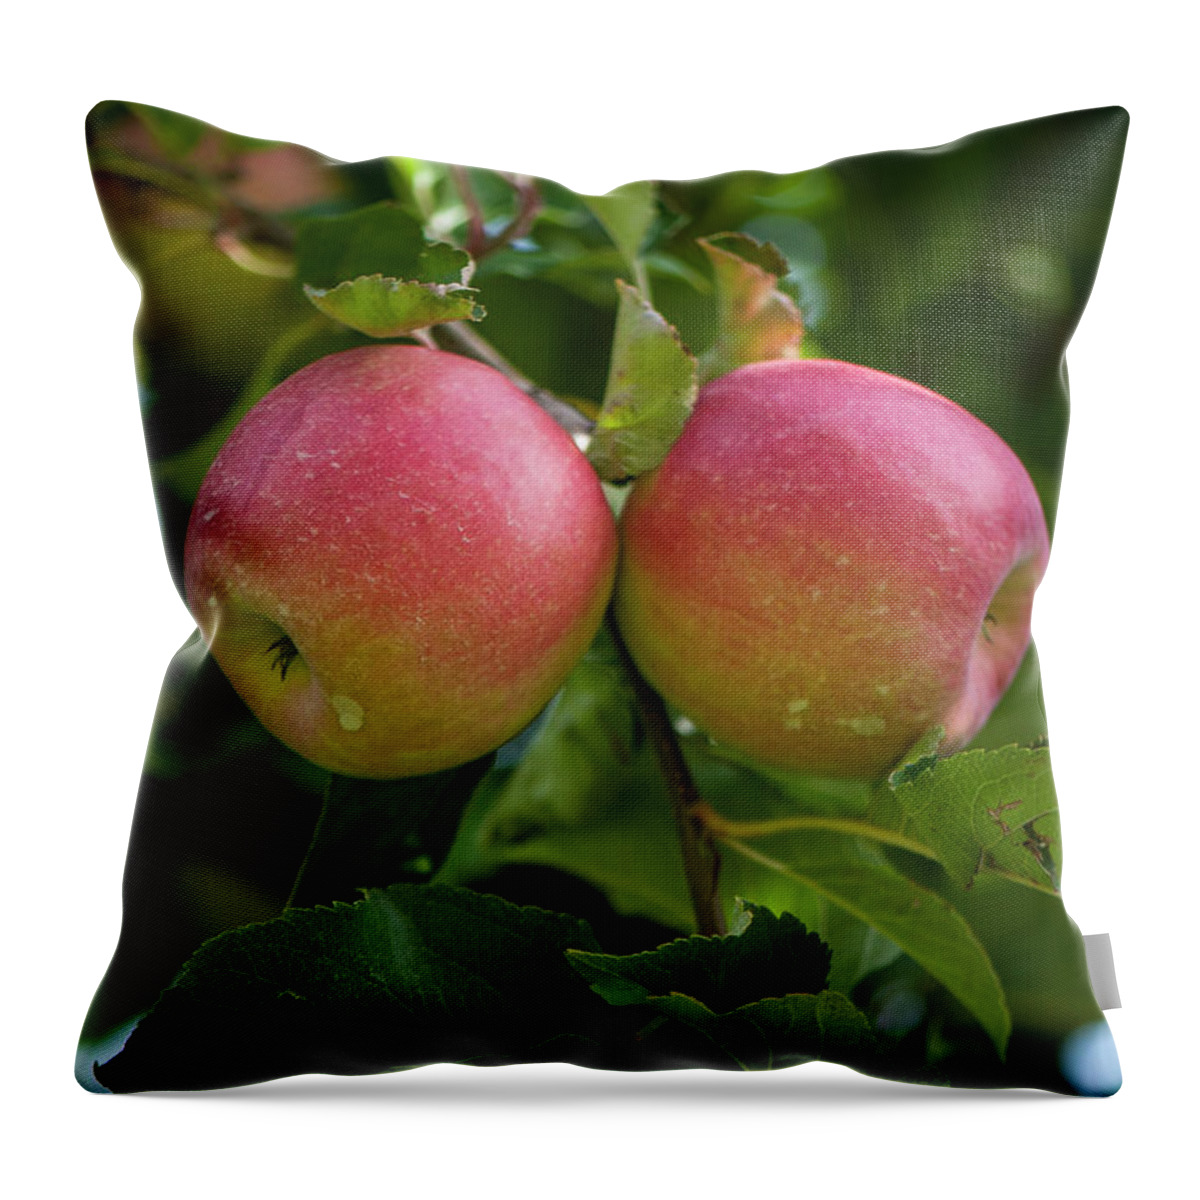 Apple Orchard Throw Pillow featuring the photograph Apple Twins by Brian Green